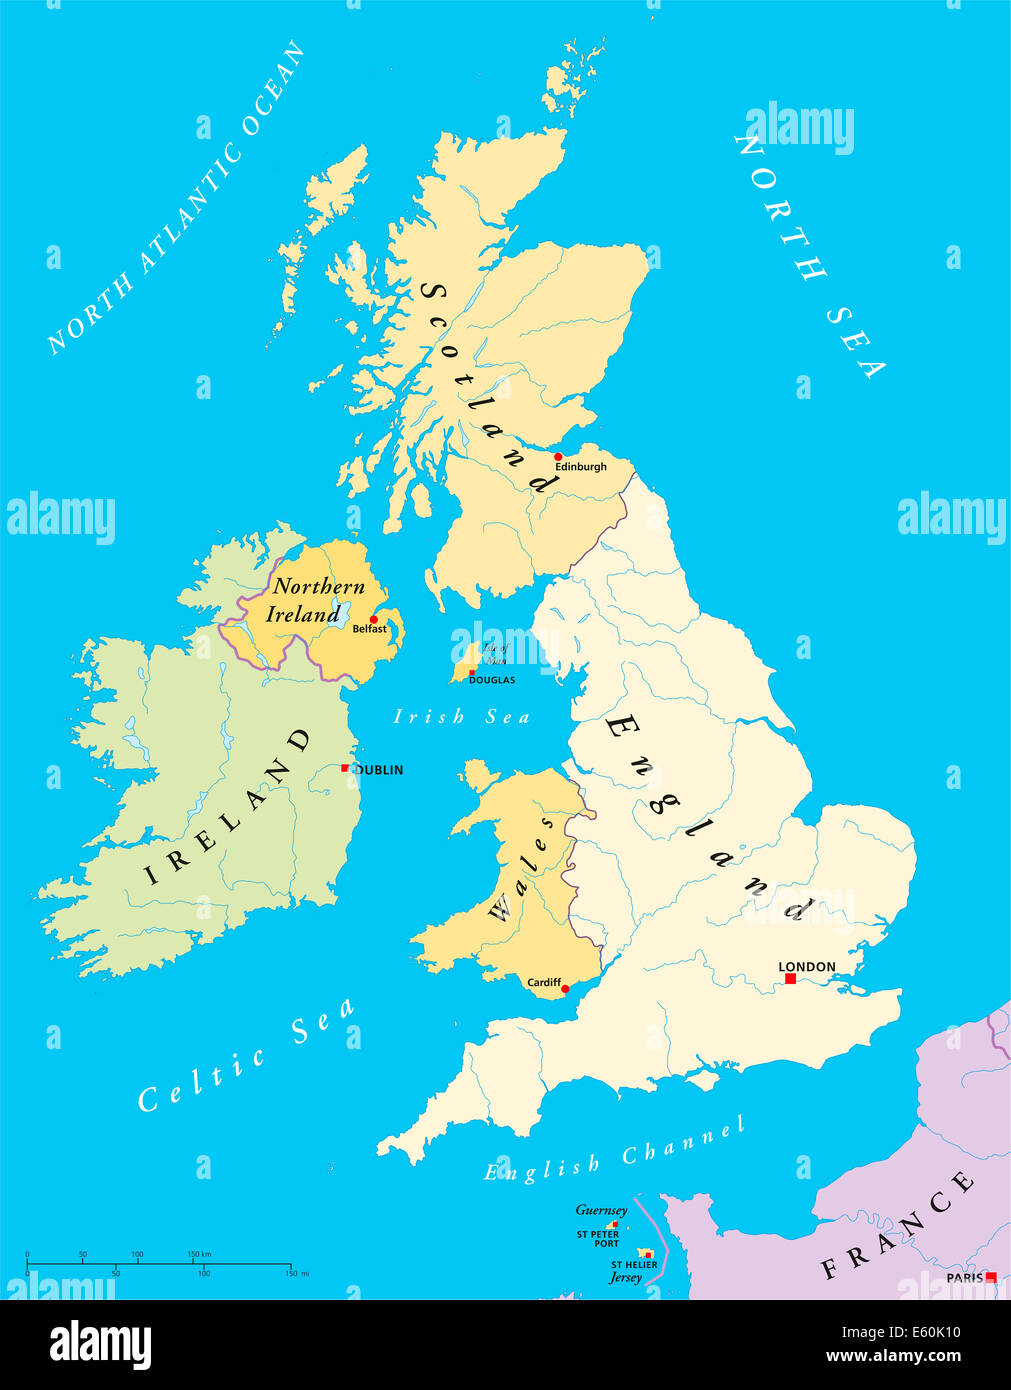 British Isles Map - British Isles Map with capitals, national borders, rivers and lakes. Illustration with English labeling. Stock Photo